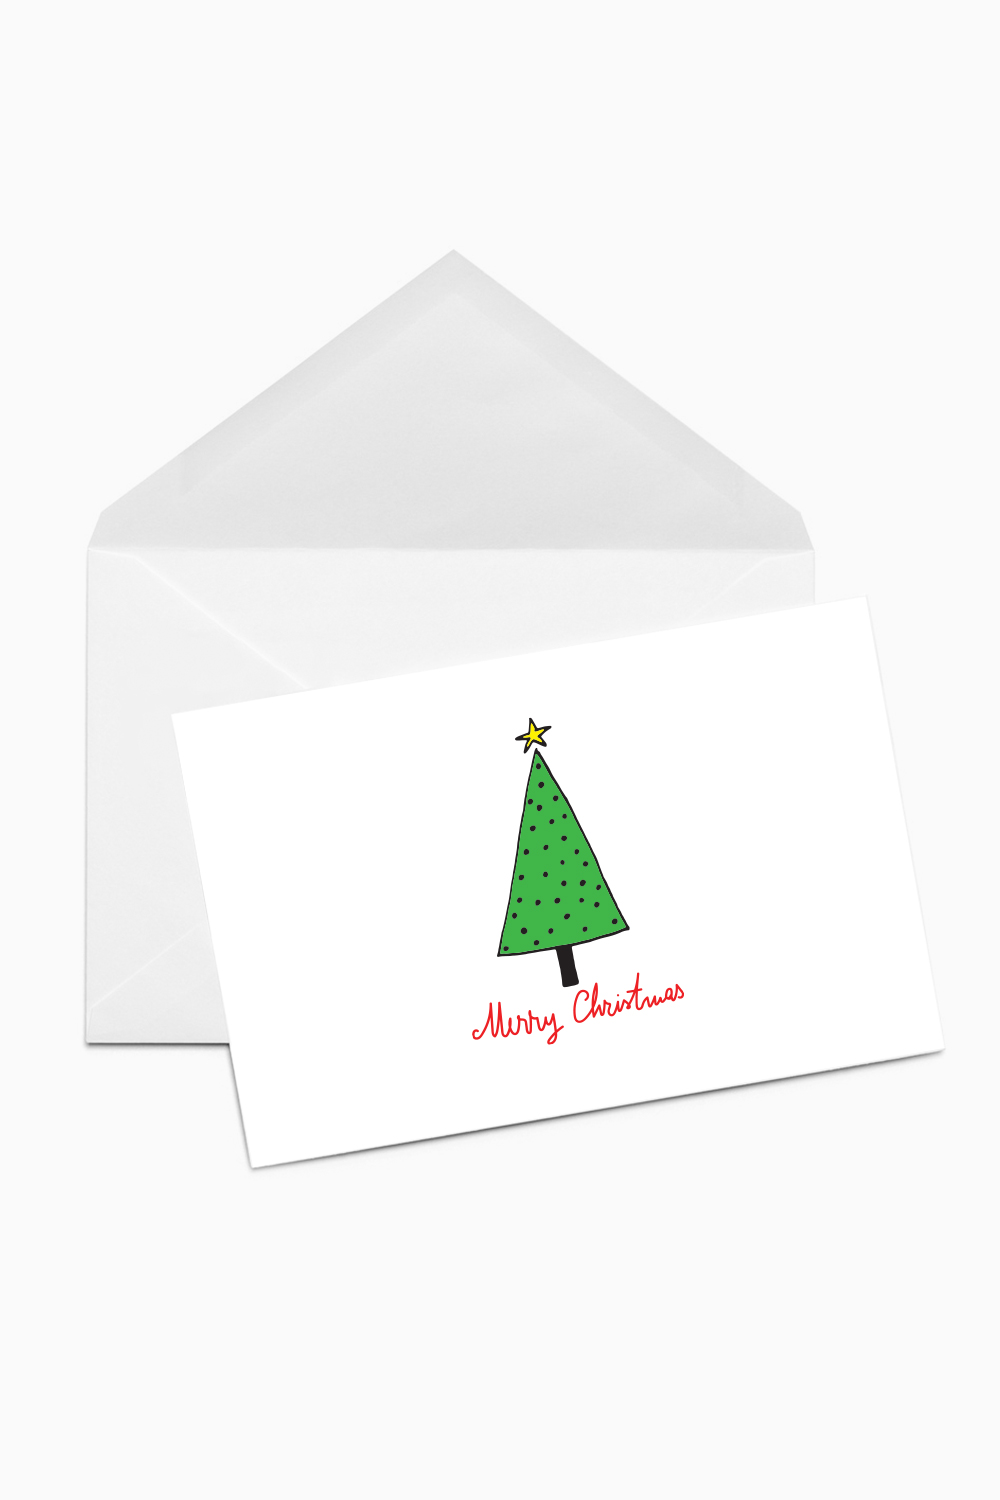 Christmas card illustrated with green Christmas tree and a merry Christmas message.